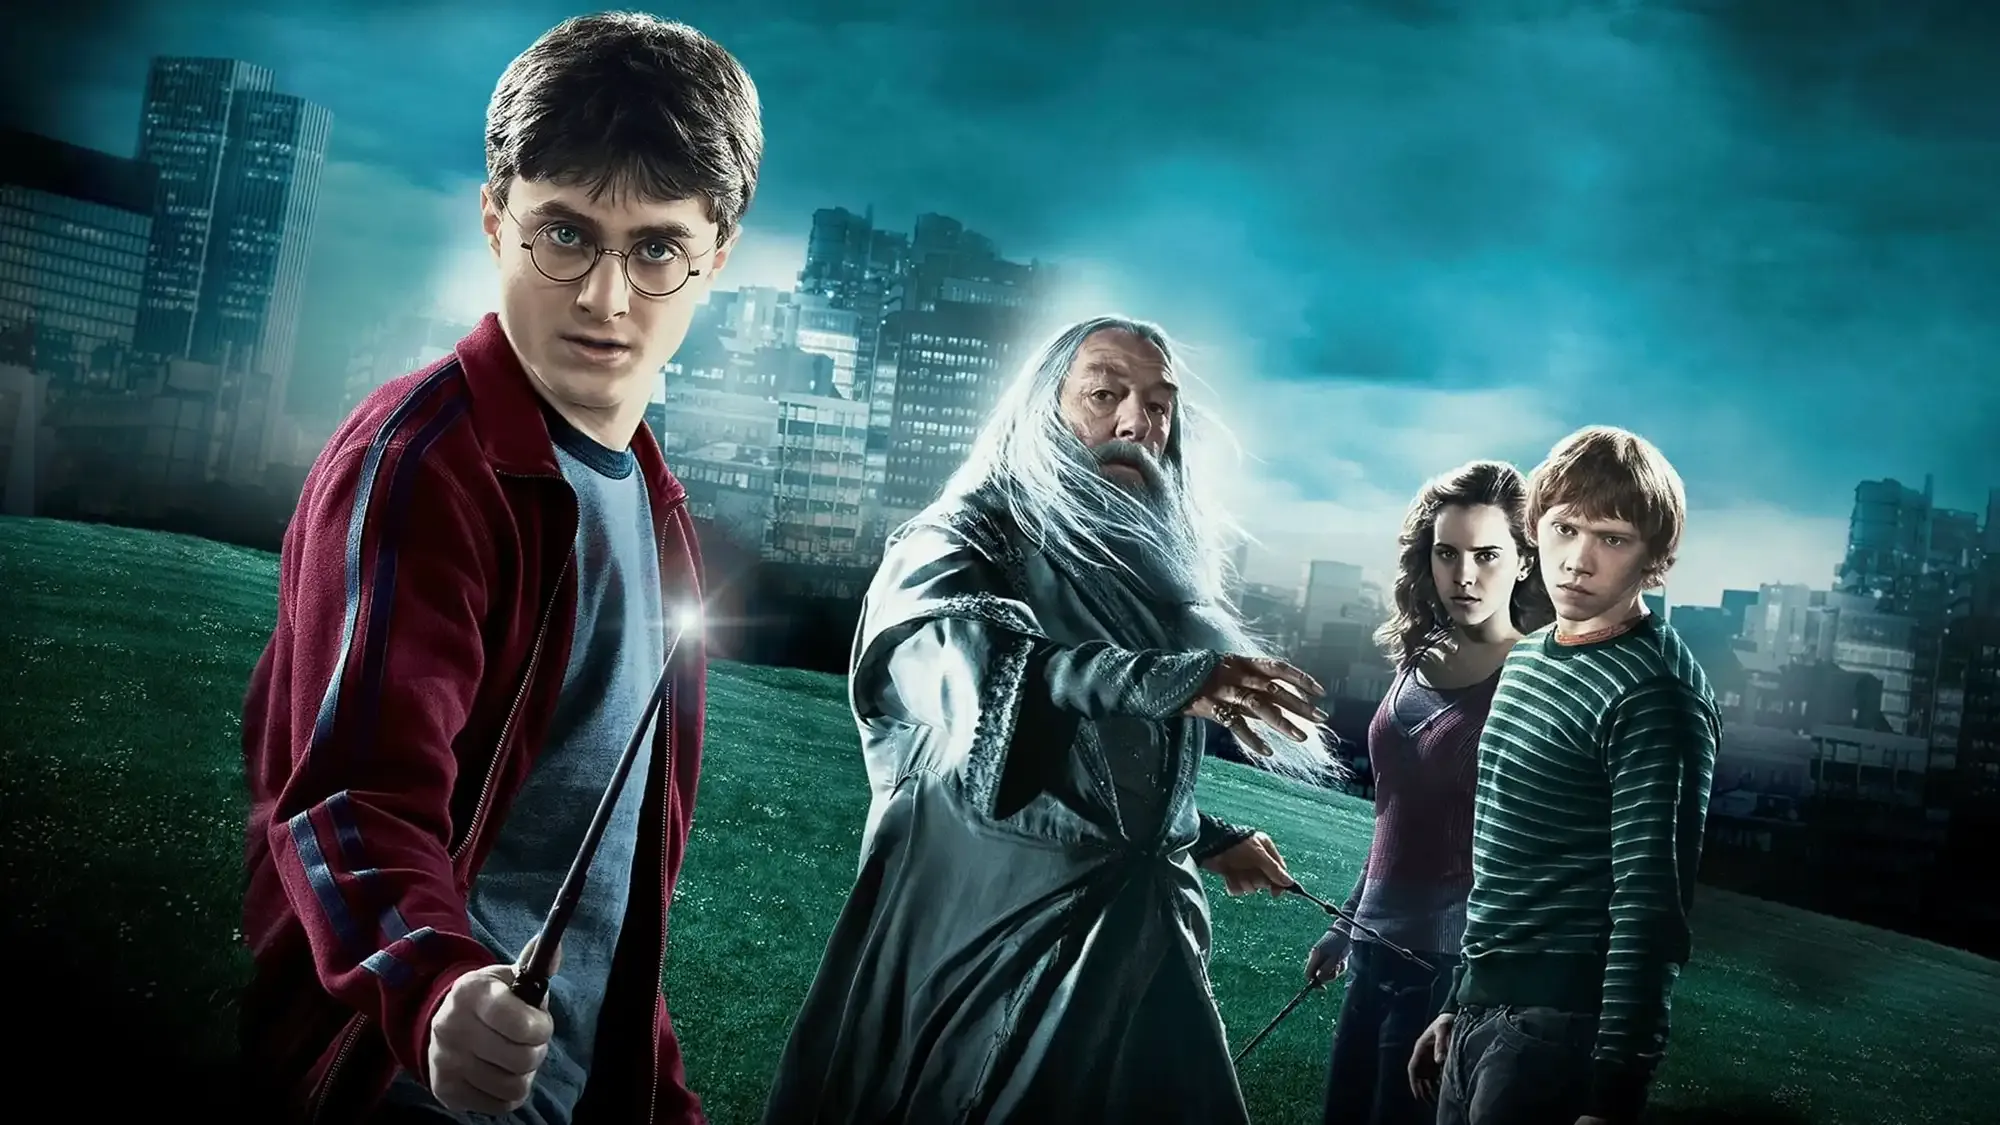 Harry Potter and the Half-Blood Prince movie review